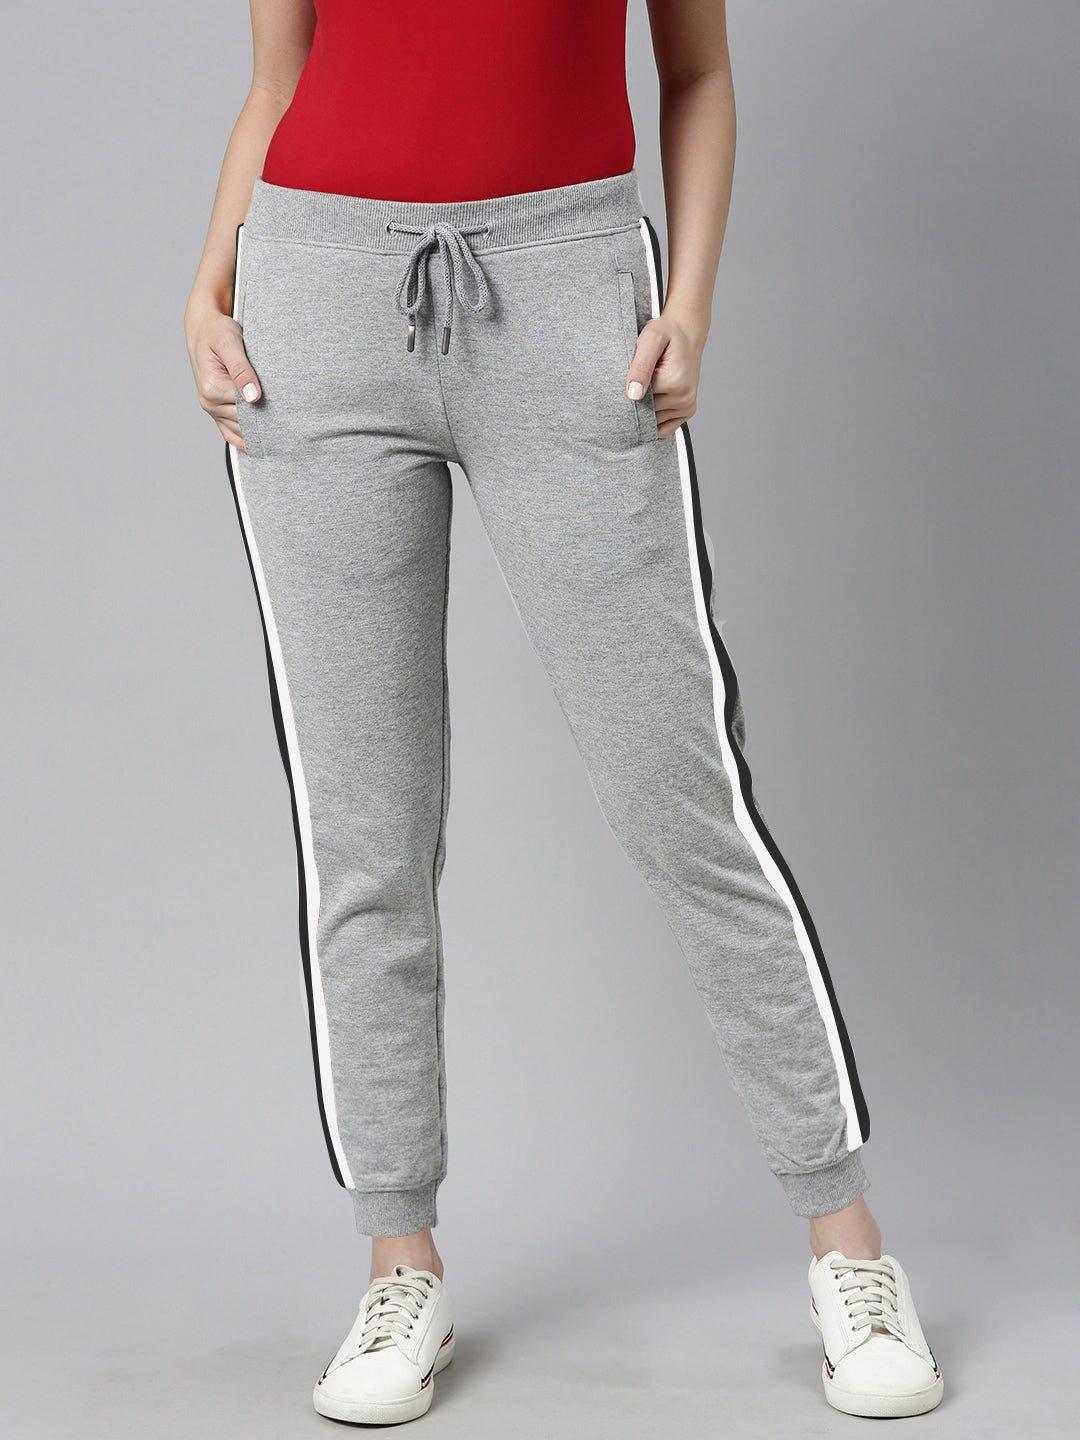 Joggers For Women in Grey Colour Variant